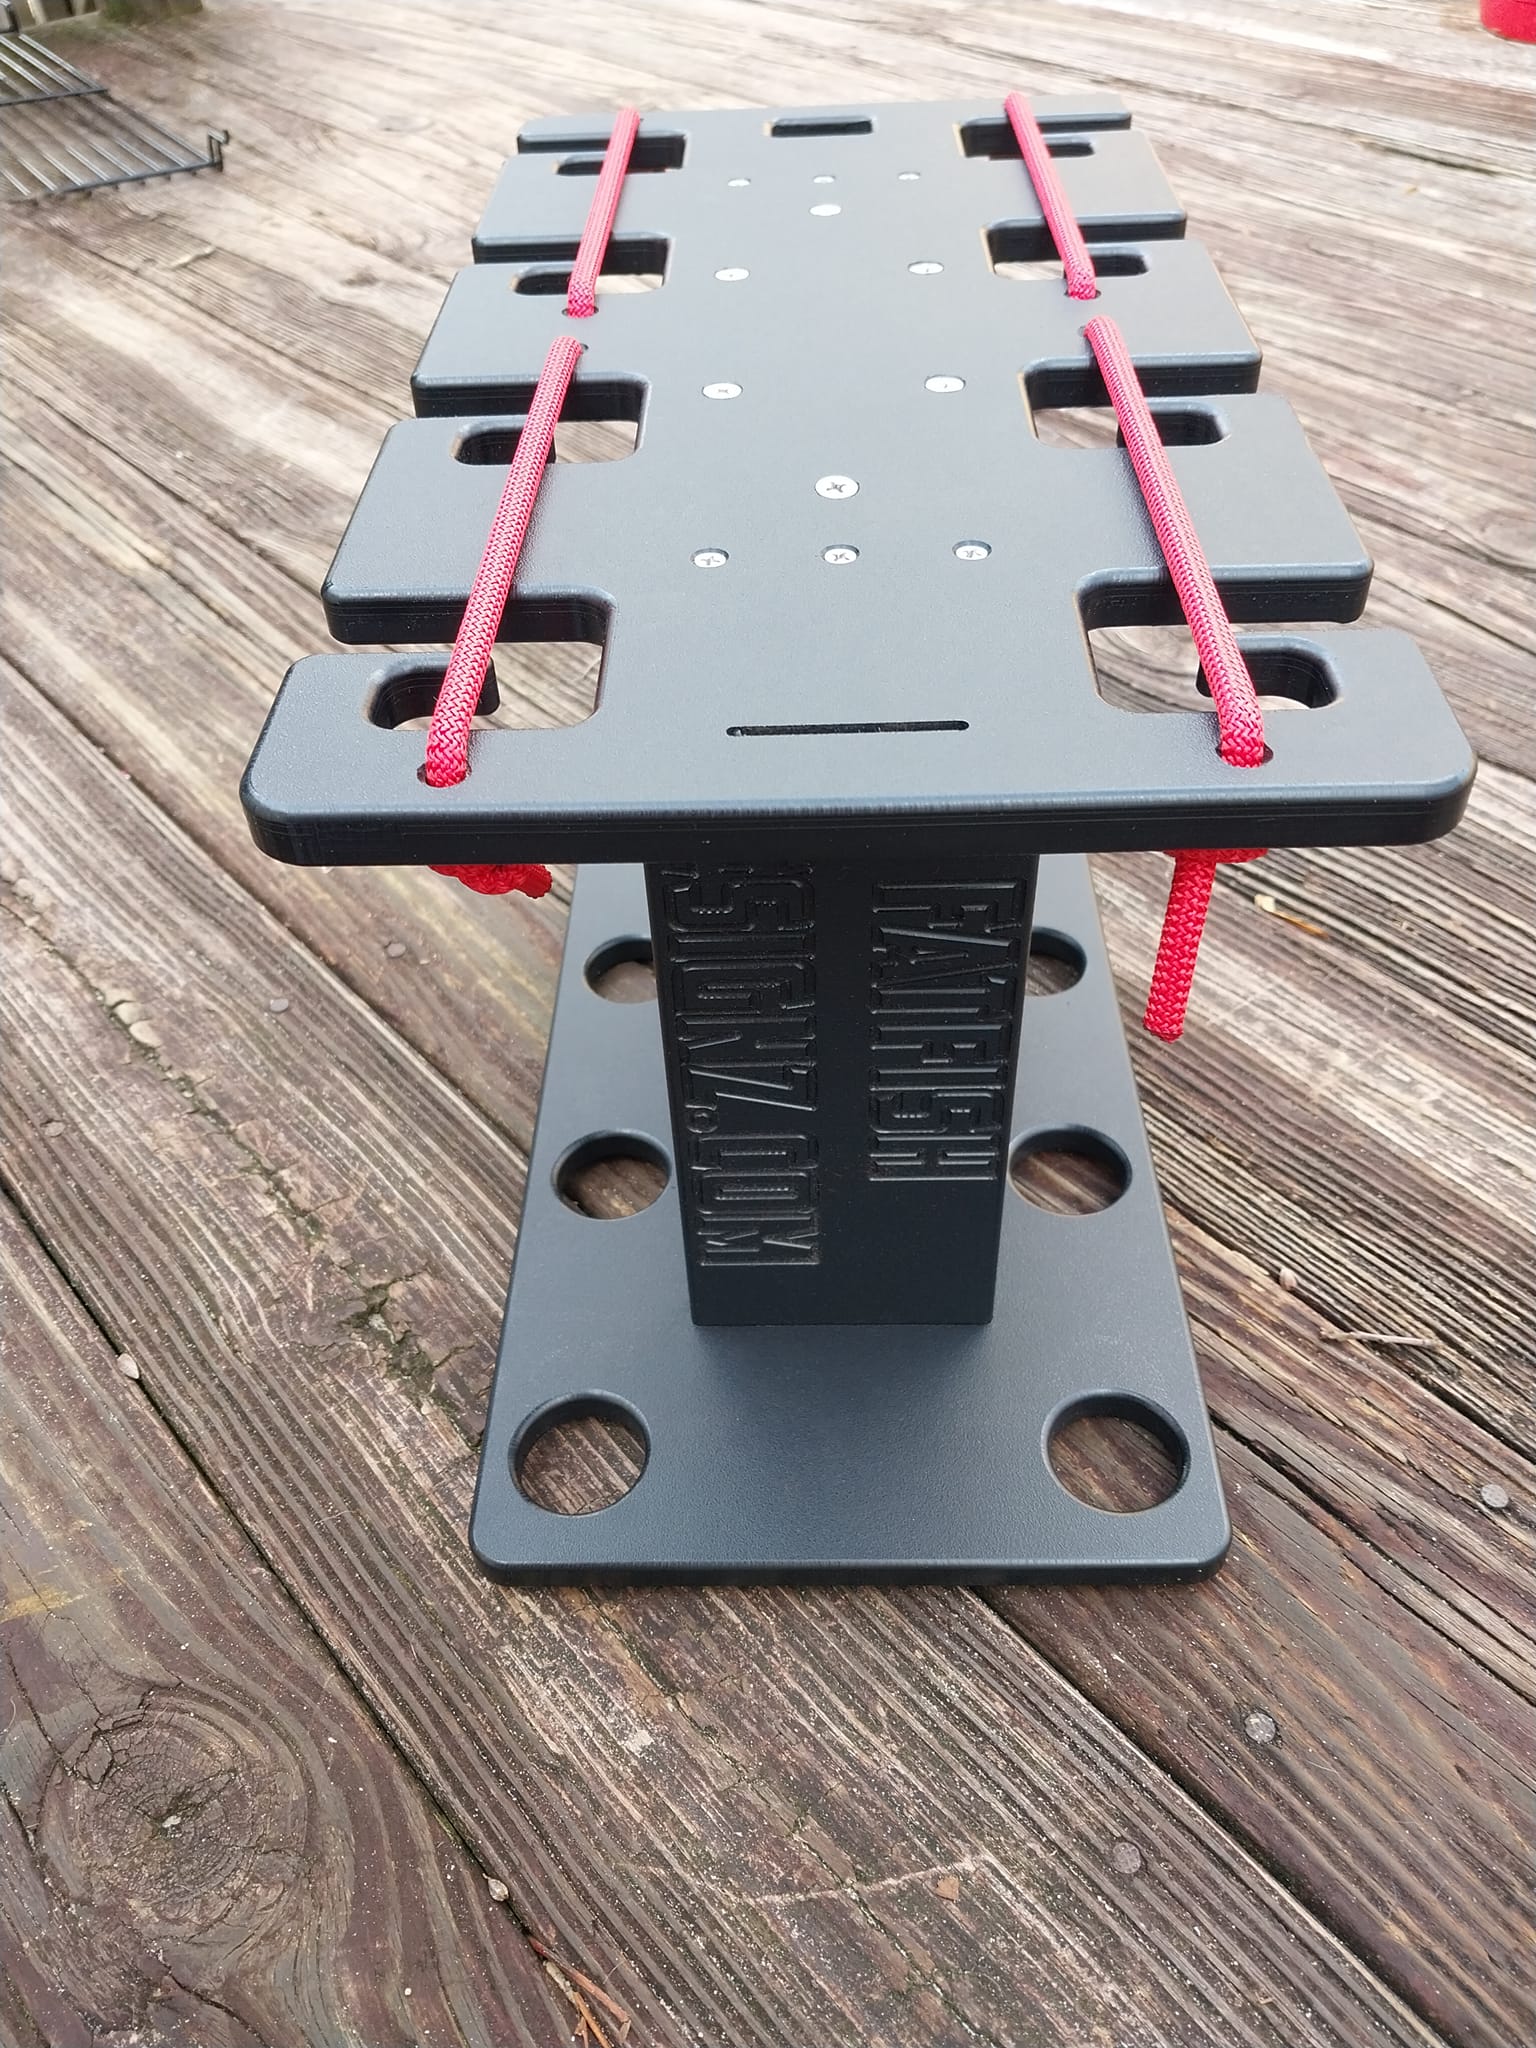 Pan fish edition rod rack (holds panfish / bass style rods)